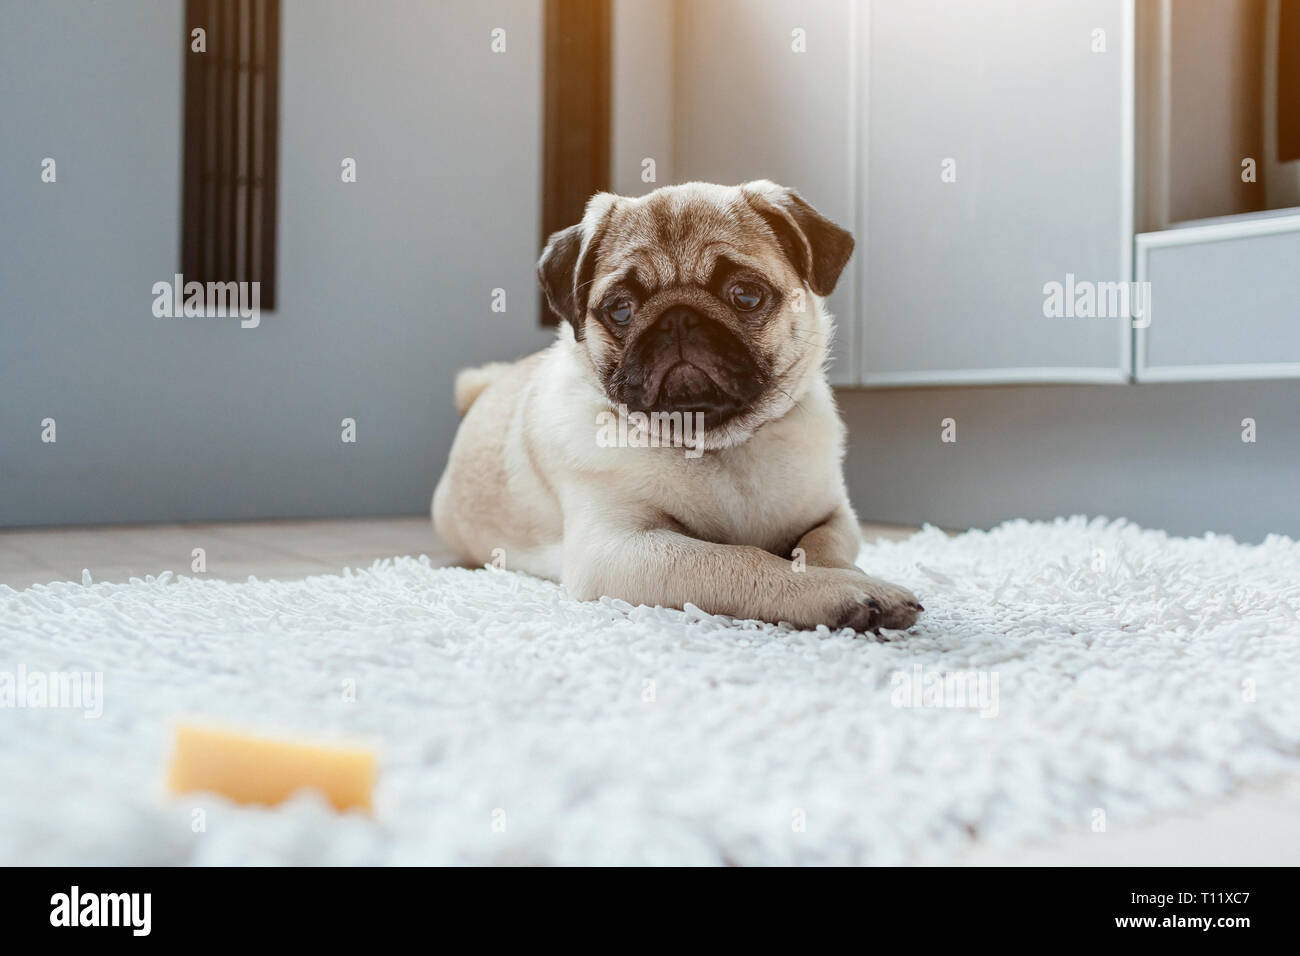 Pug dog waiting for a permission to eat cheese on the kitchen. Training patience. Hungry pug dog puppy looks on food. Stock Photo